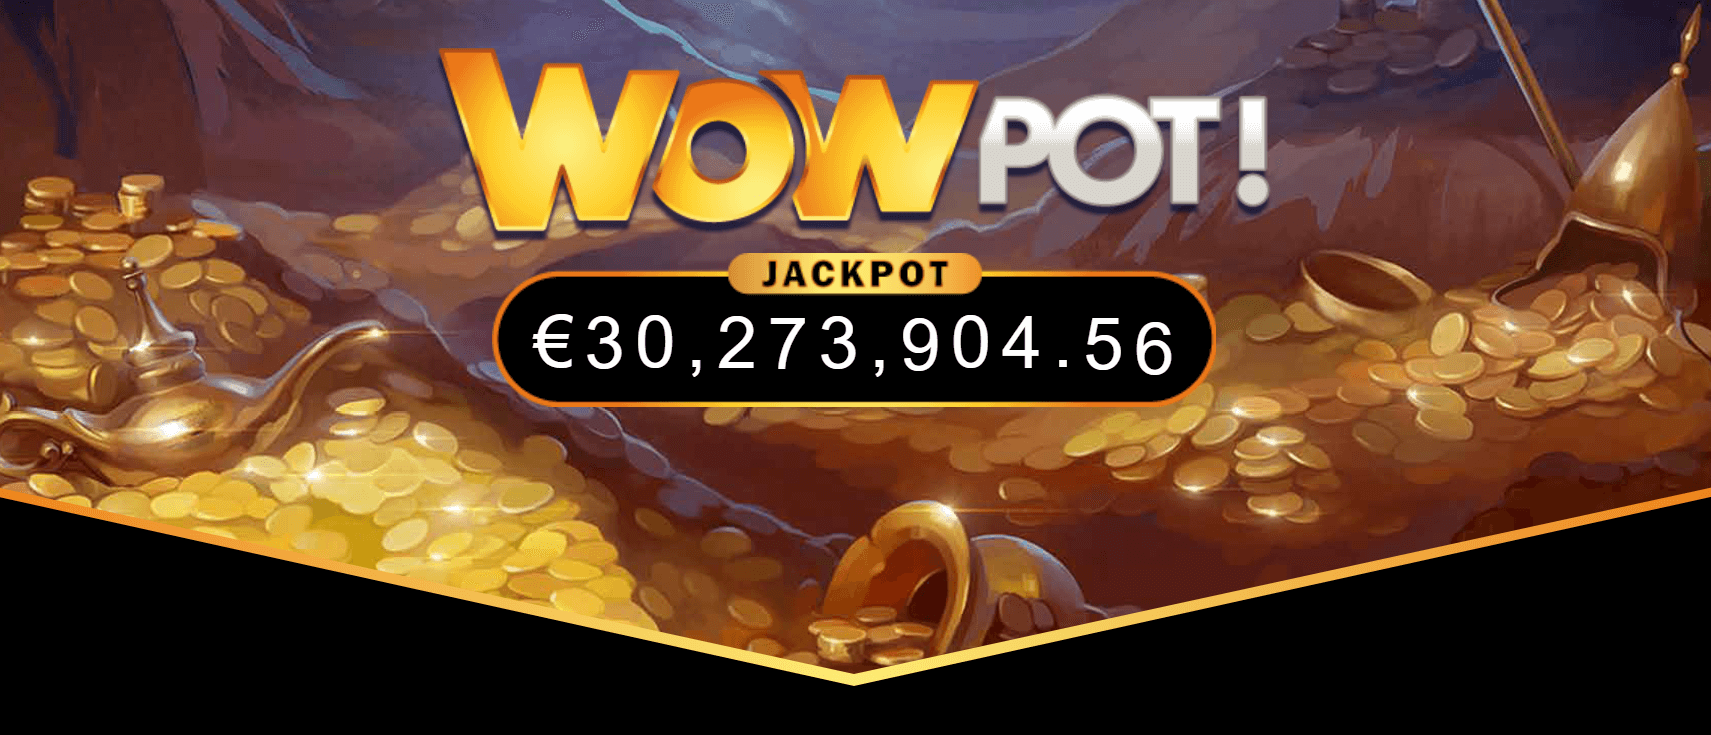 WOWPOT ONLINE SLOT CLAIMS RECORD FOR LARGEST EVER ONLINE CASINO JACKPOT